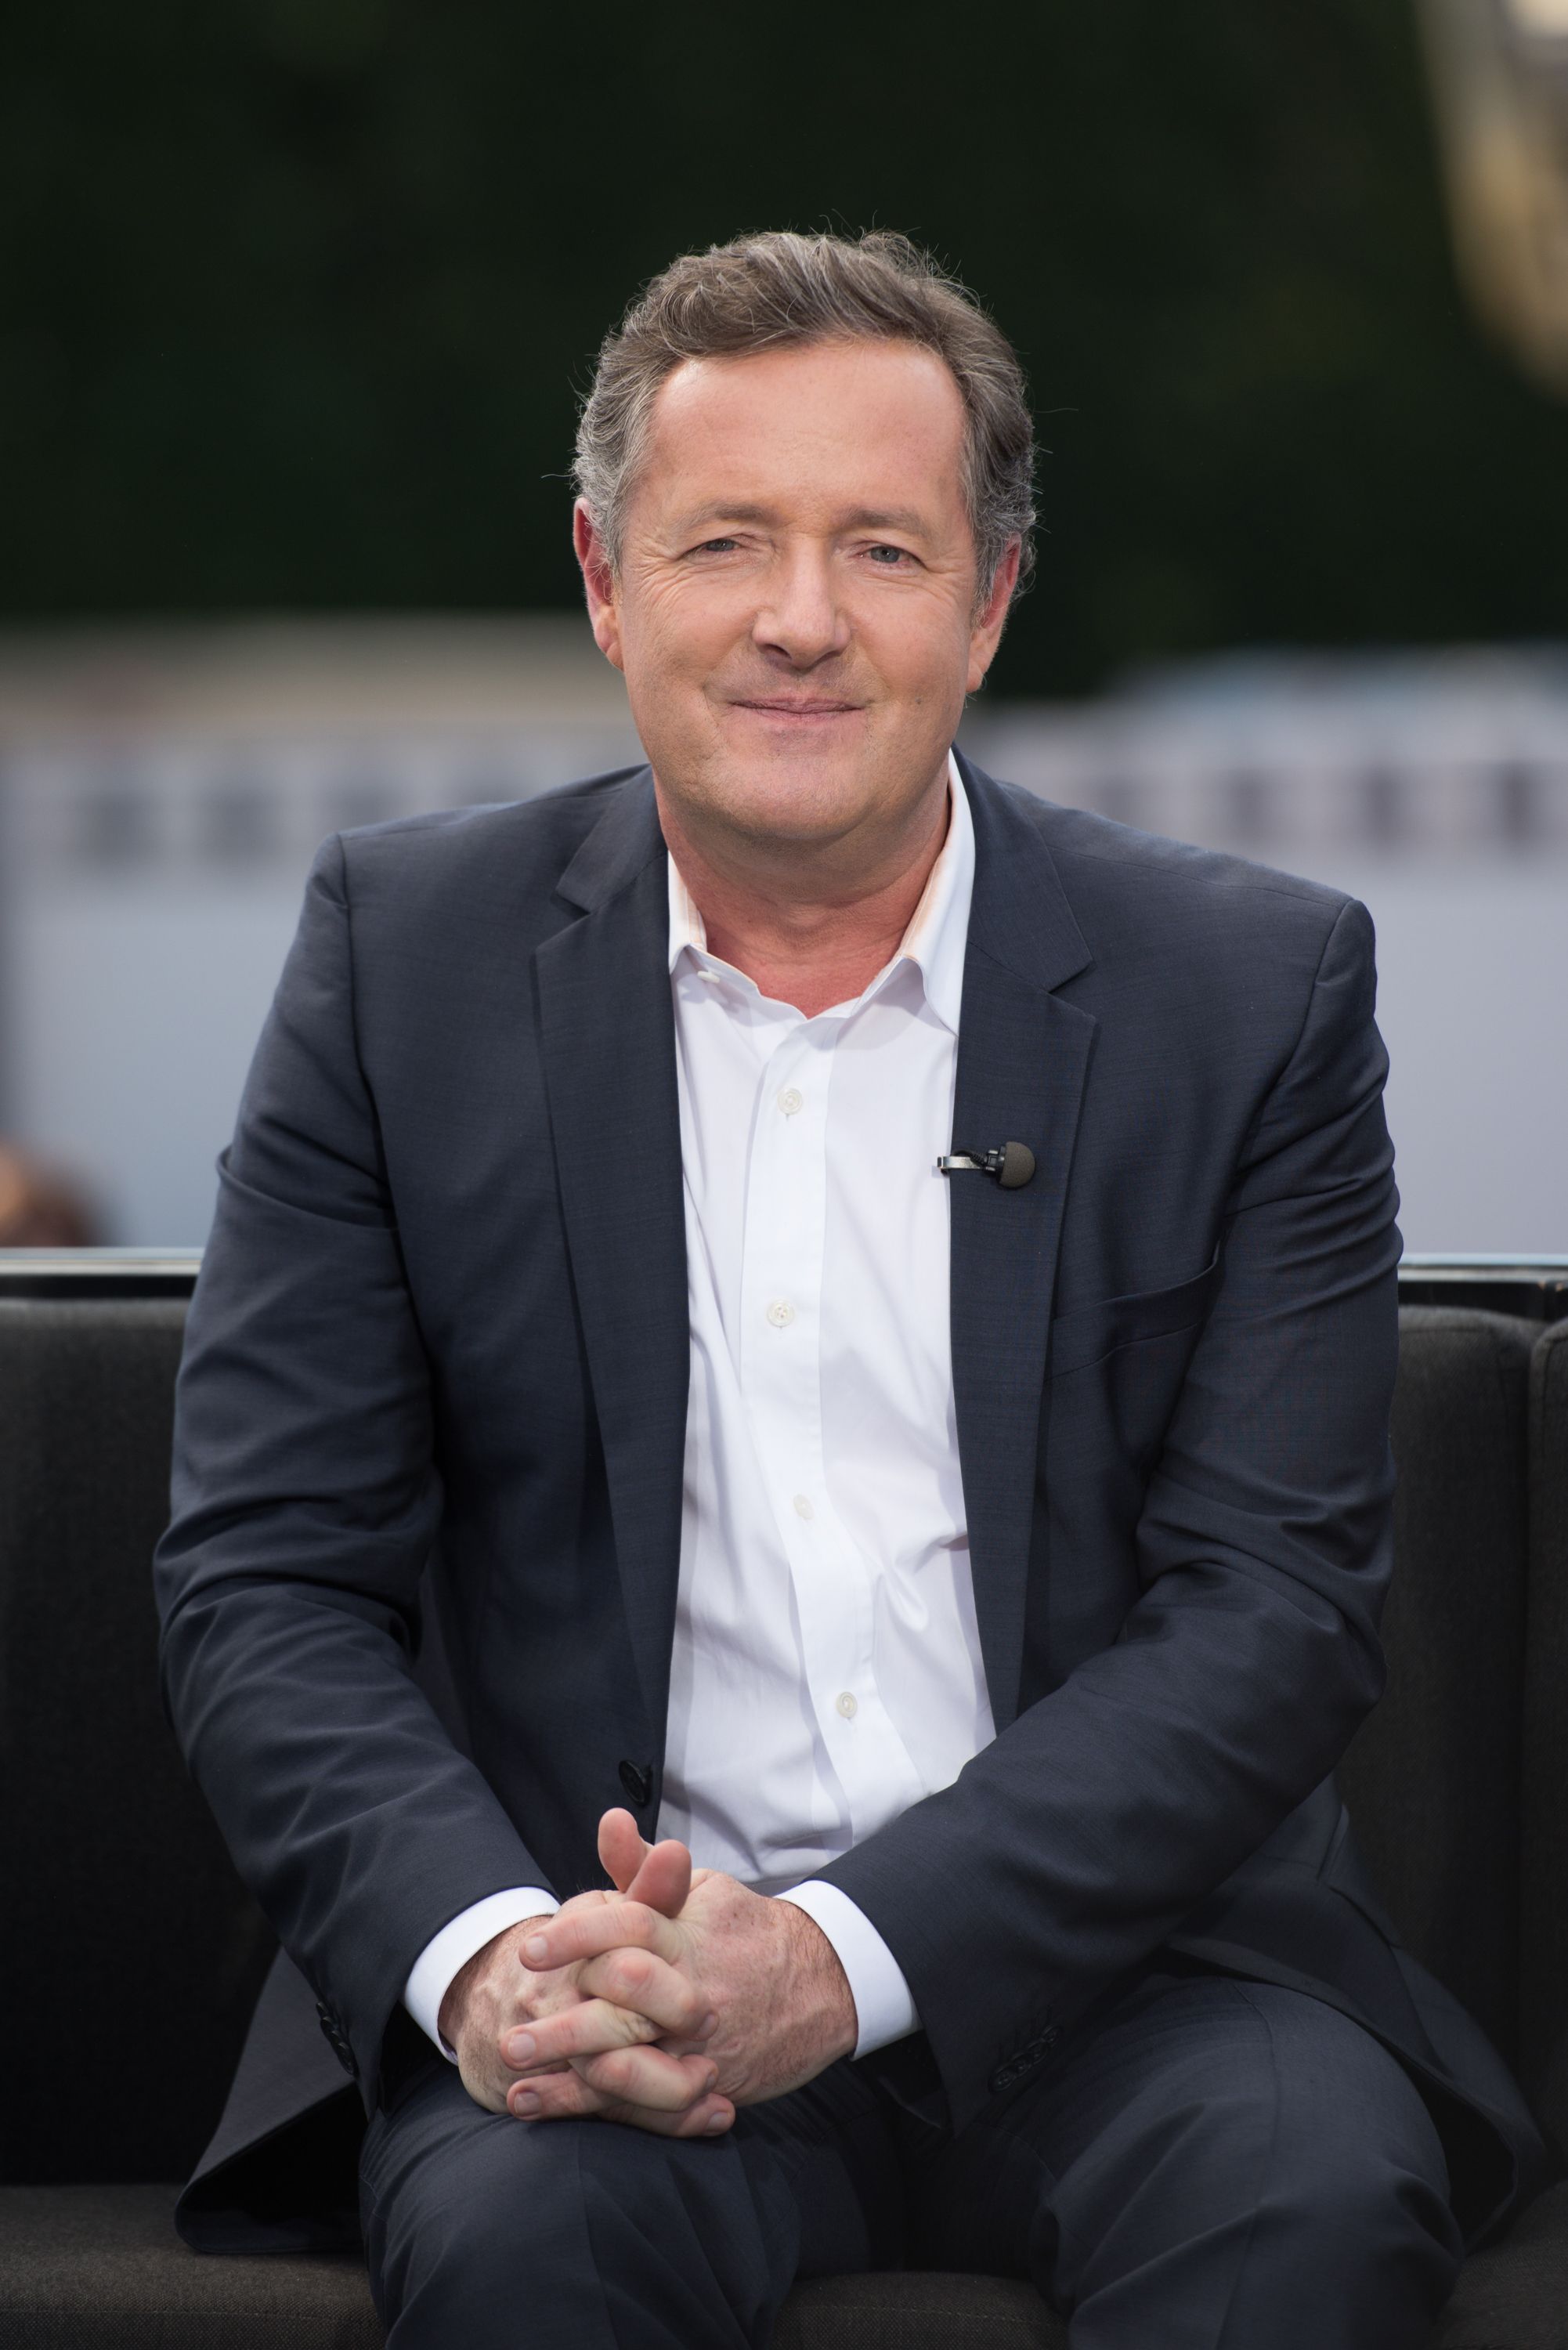 Piers Morgan visits "Extra" at Universal Studios Hollywood in Universal City, California on February 11, 2016. | Photo: Getty Images